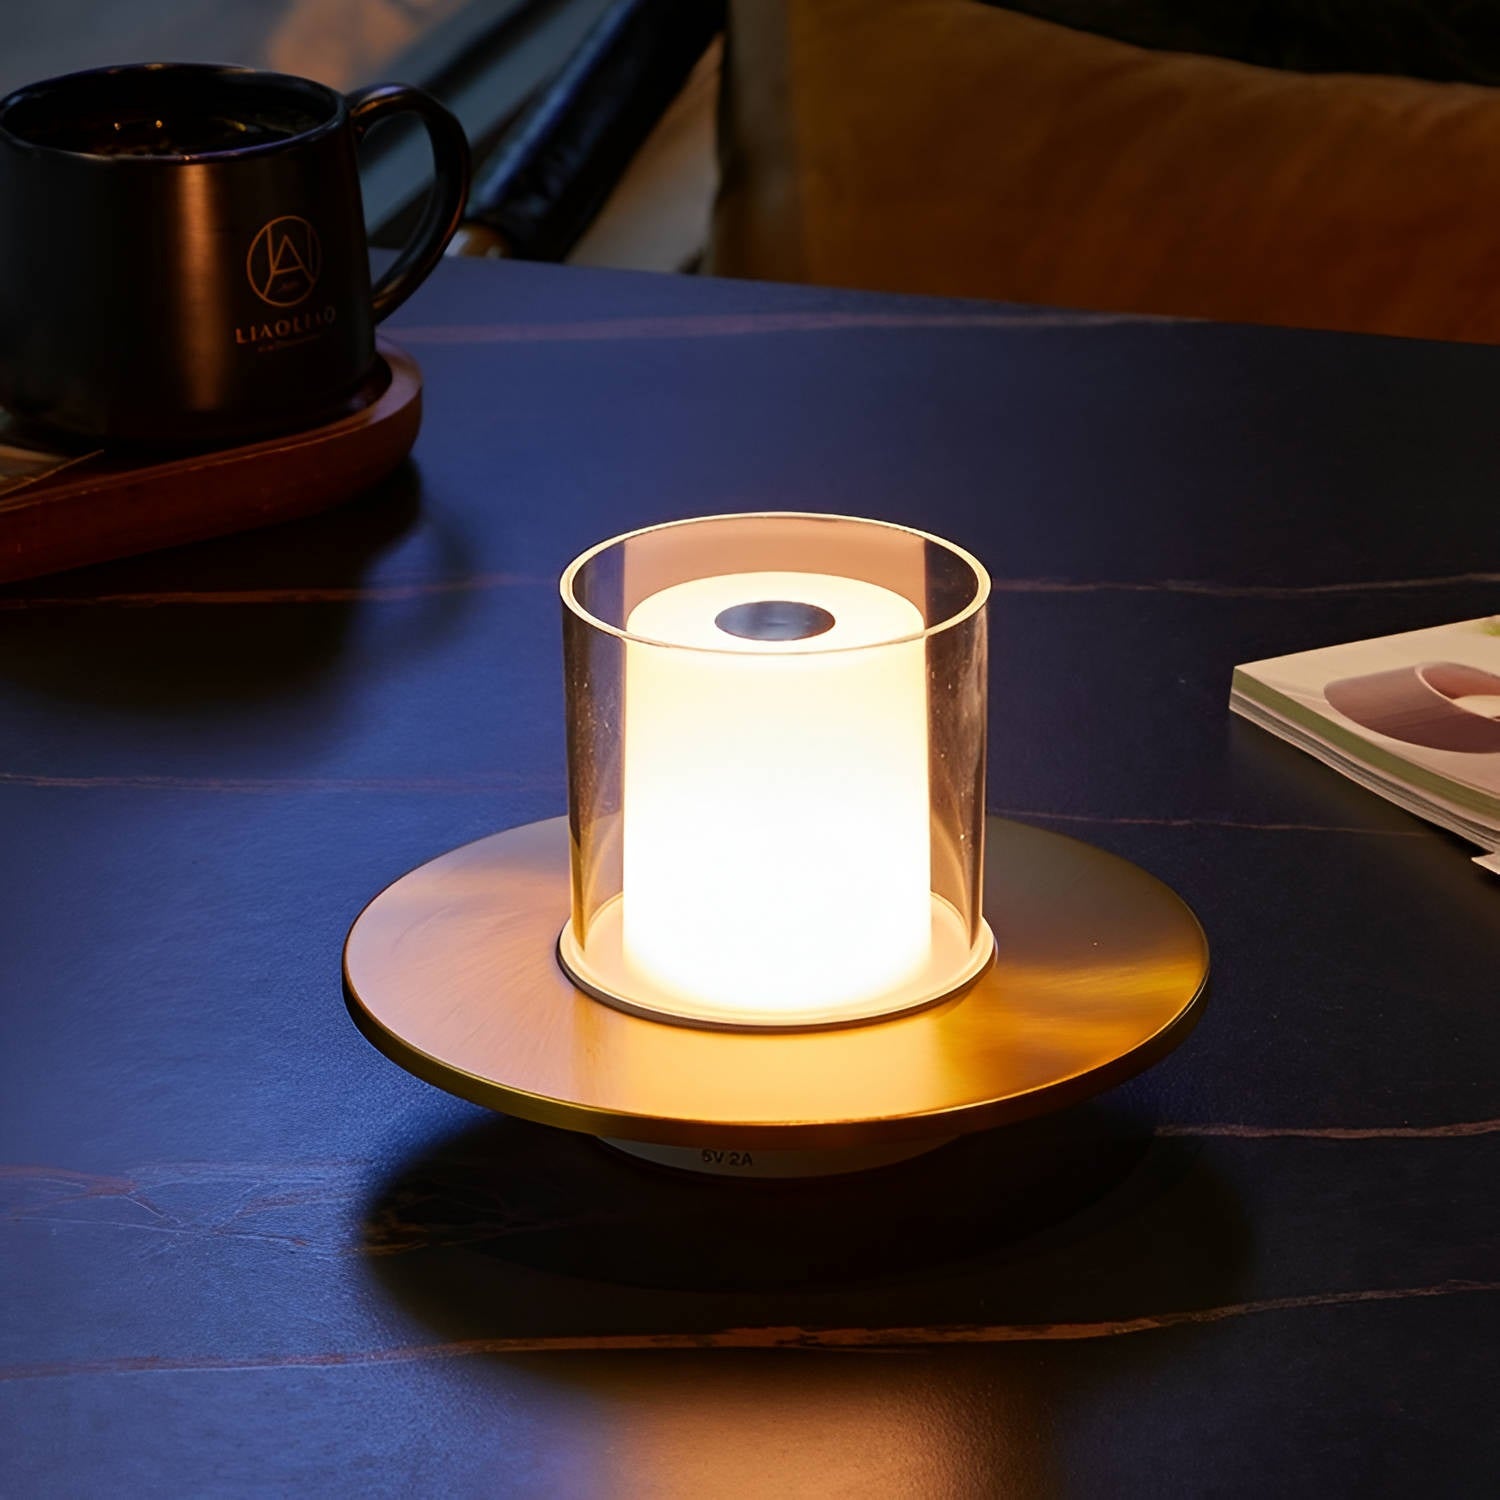 Dimmable Dining Table Lamp